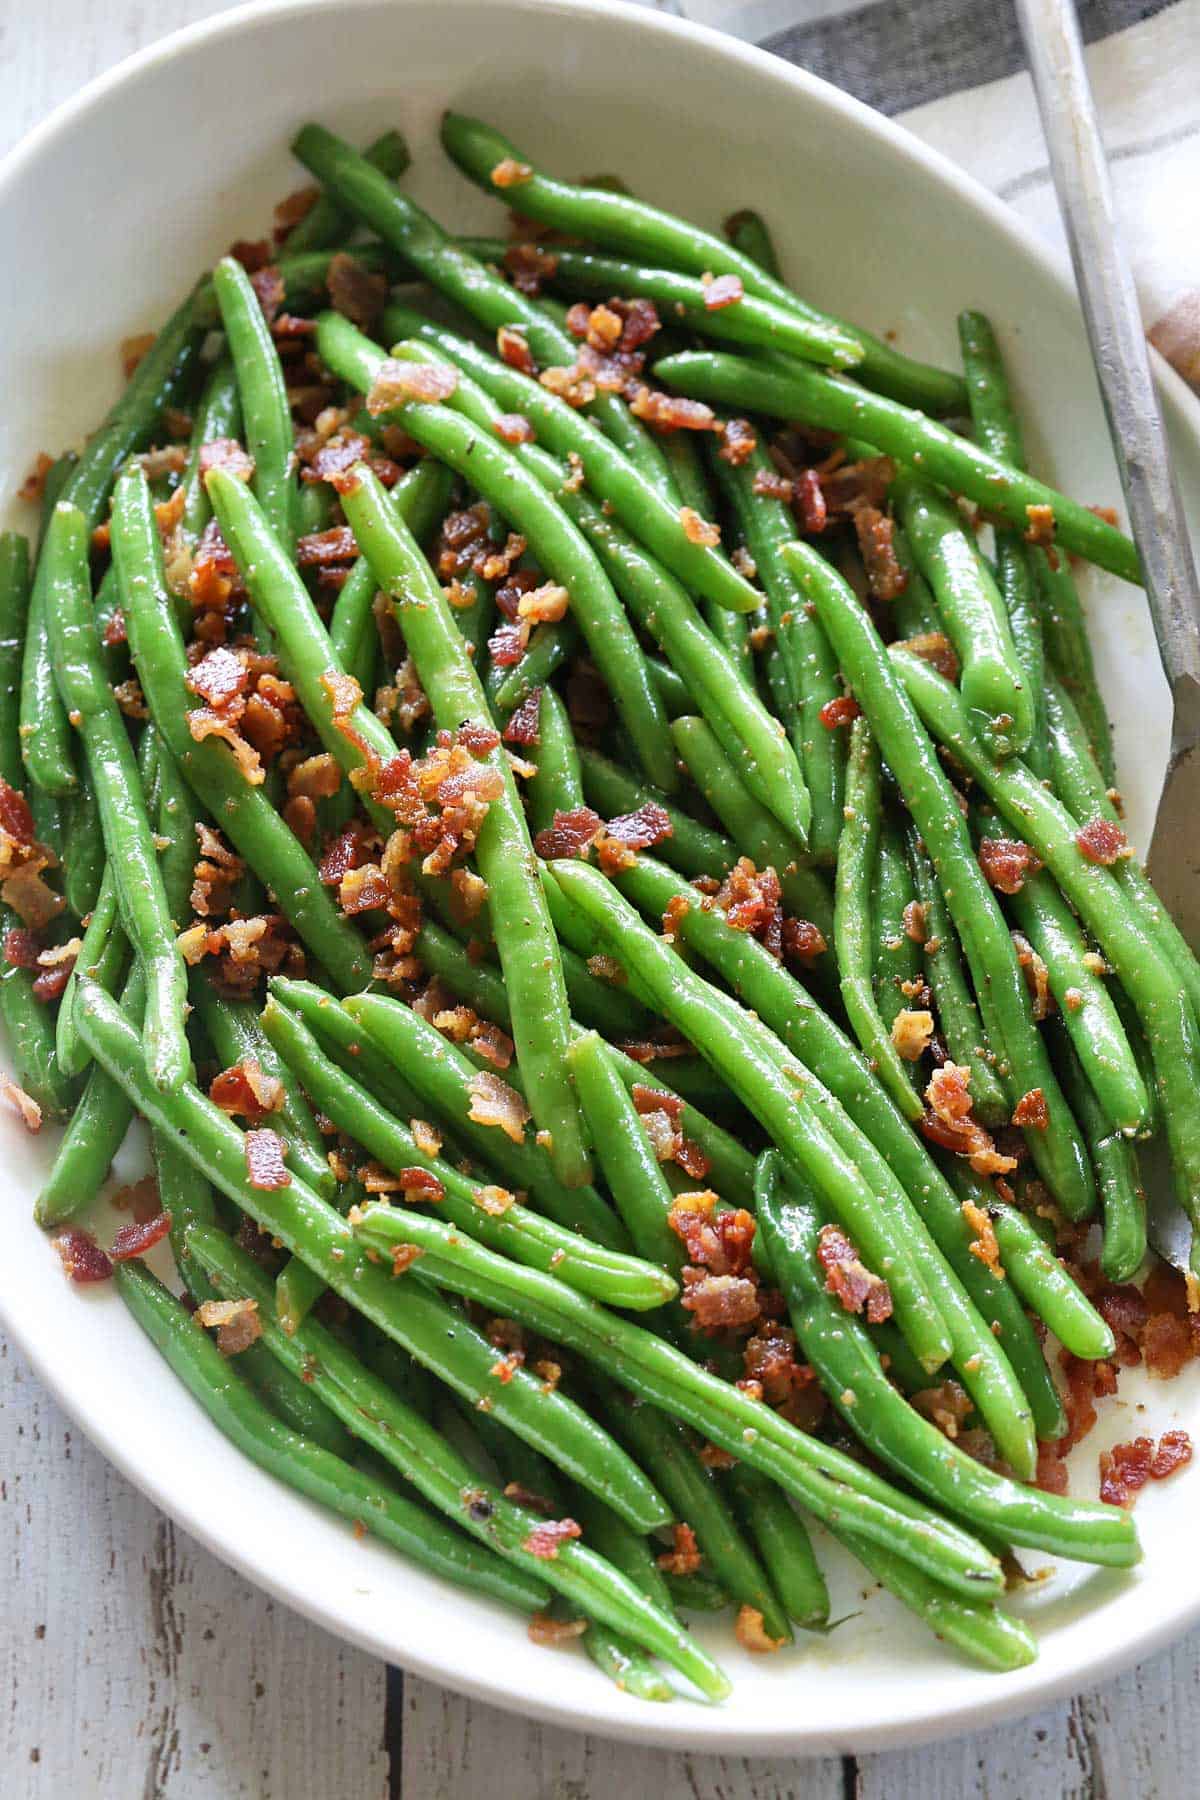 Green beans with bacon are served with a serving spoon.